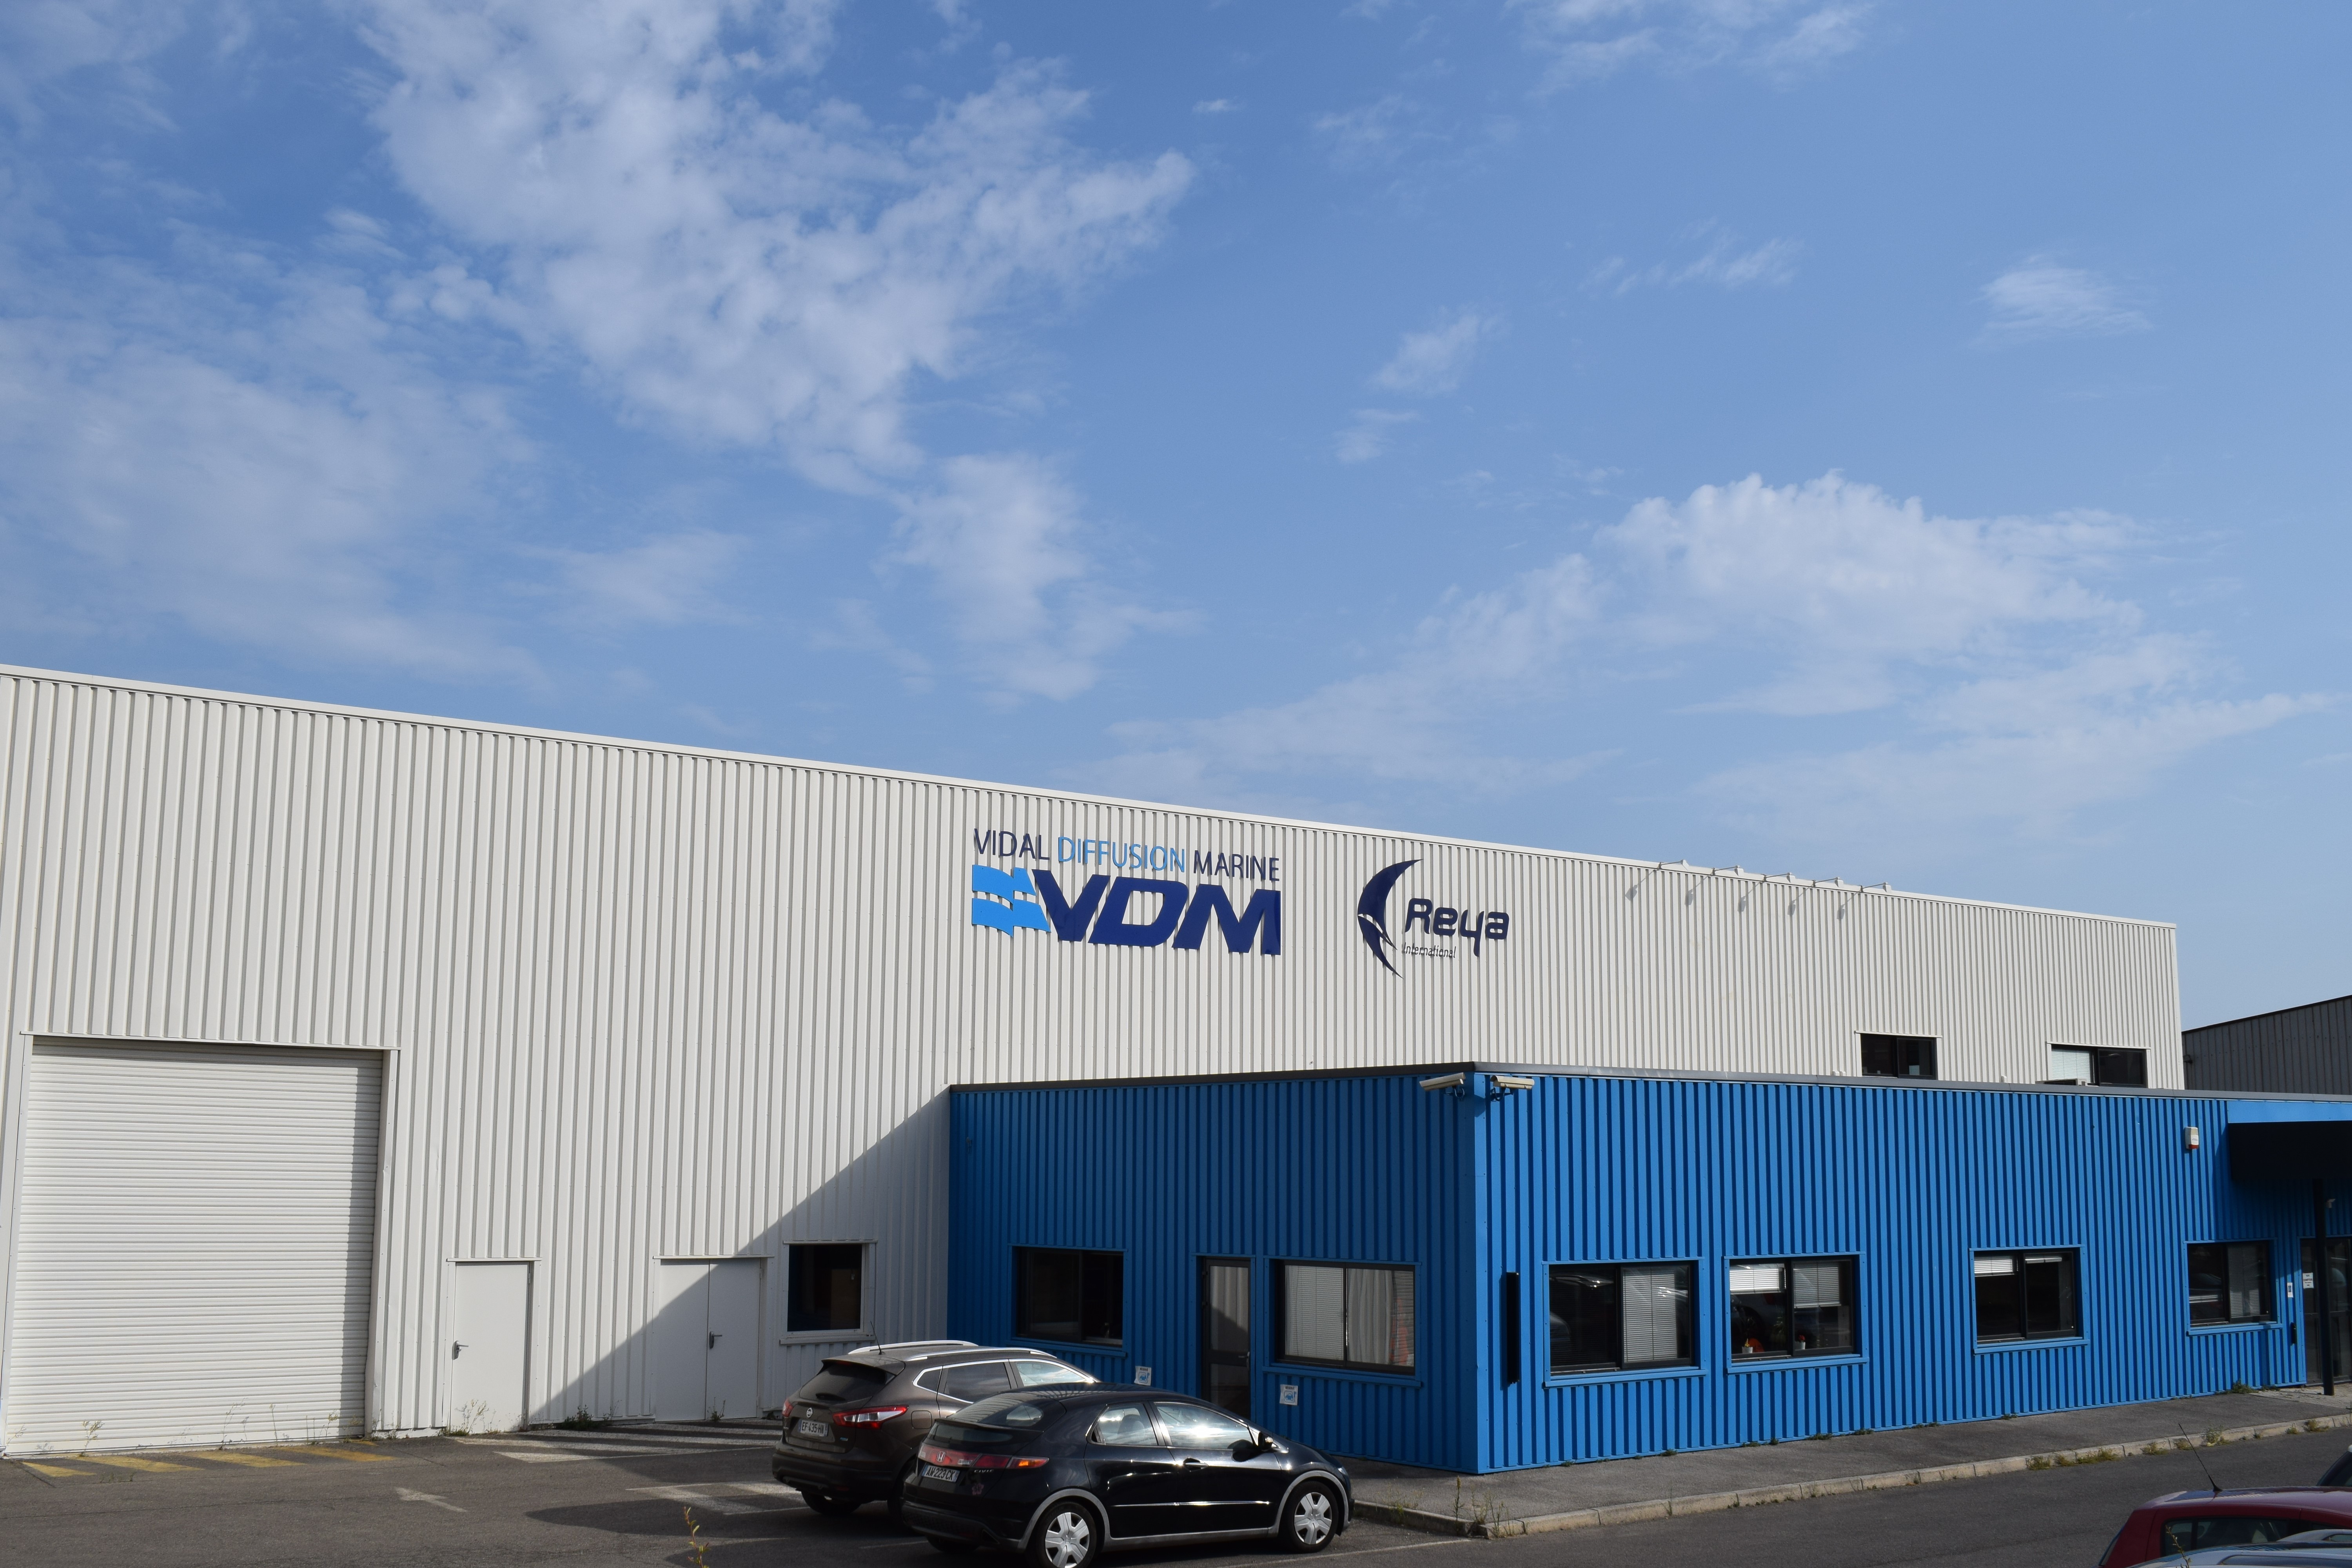 Case Study: Why VDM-Reya distributor trusts Dolphin Charger products